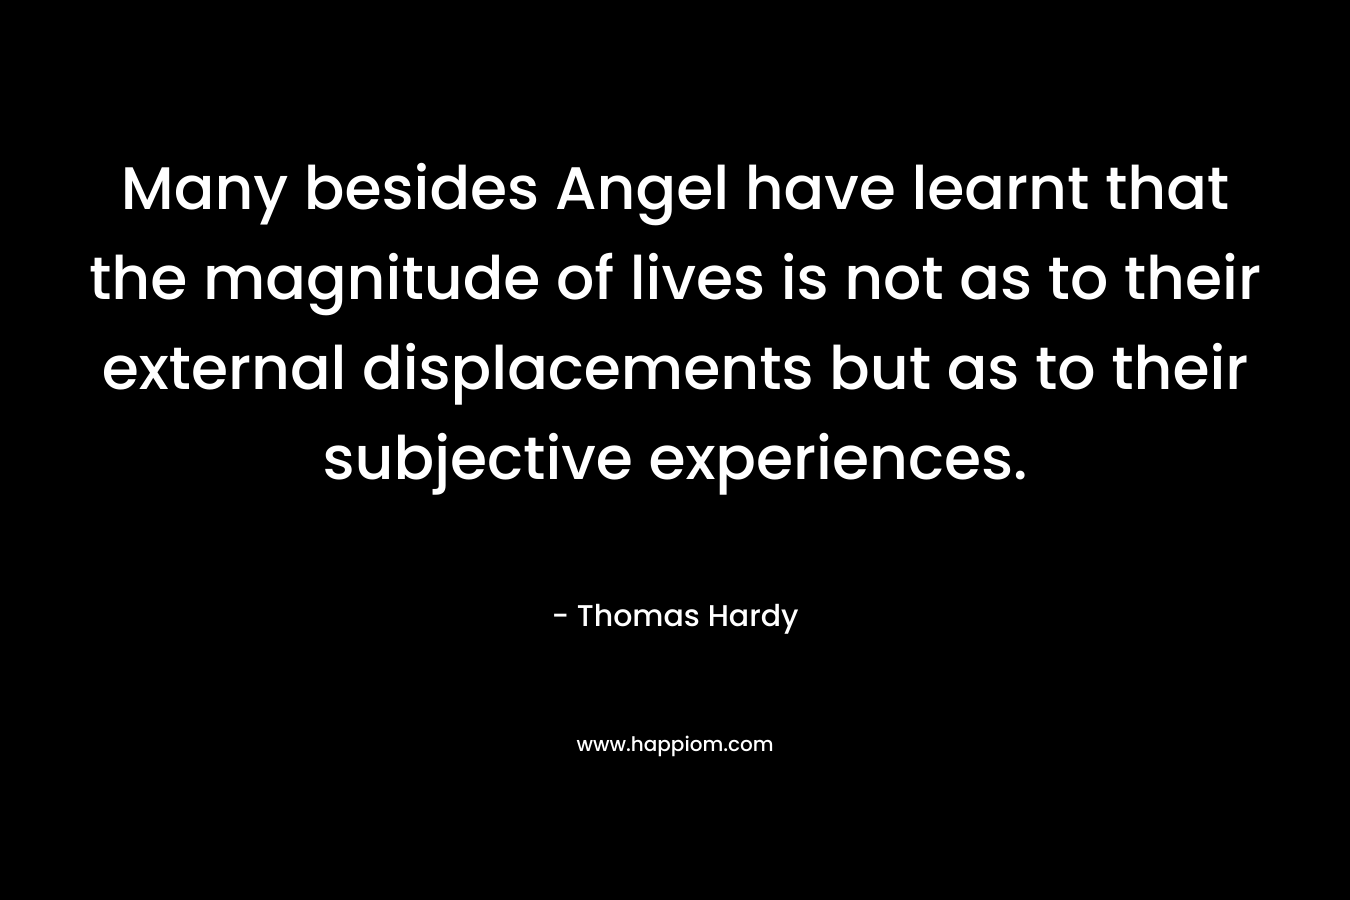 Many besides Angel have learnt that the magnitude of lives is not as to their external displacements but as to their subjective experiences. – Thomas Hardy